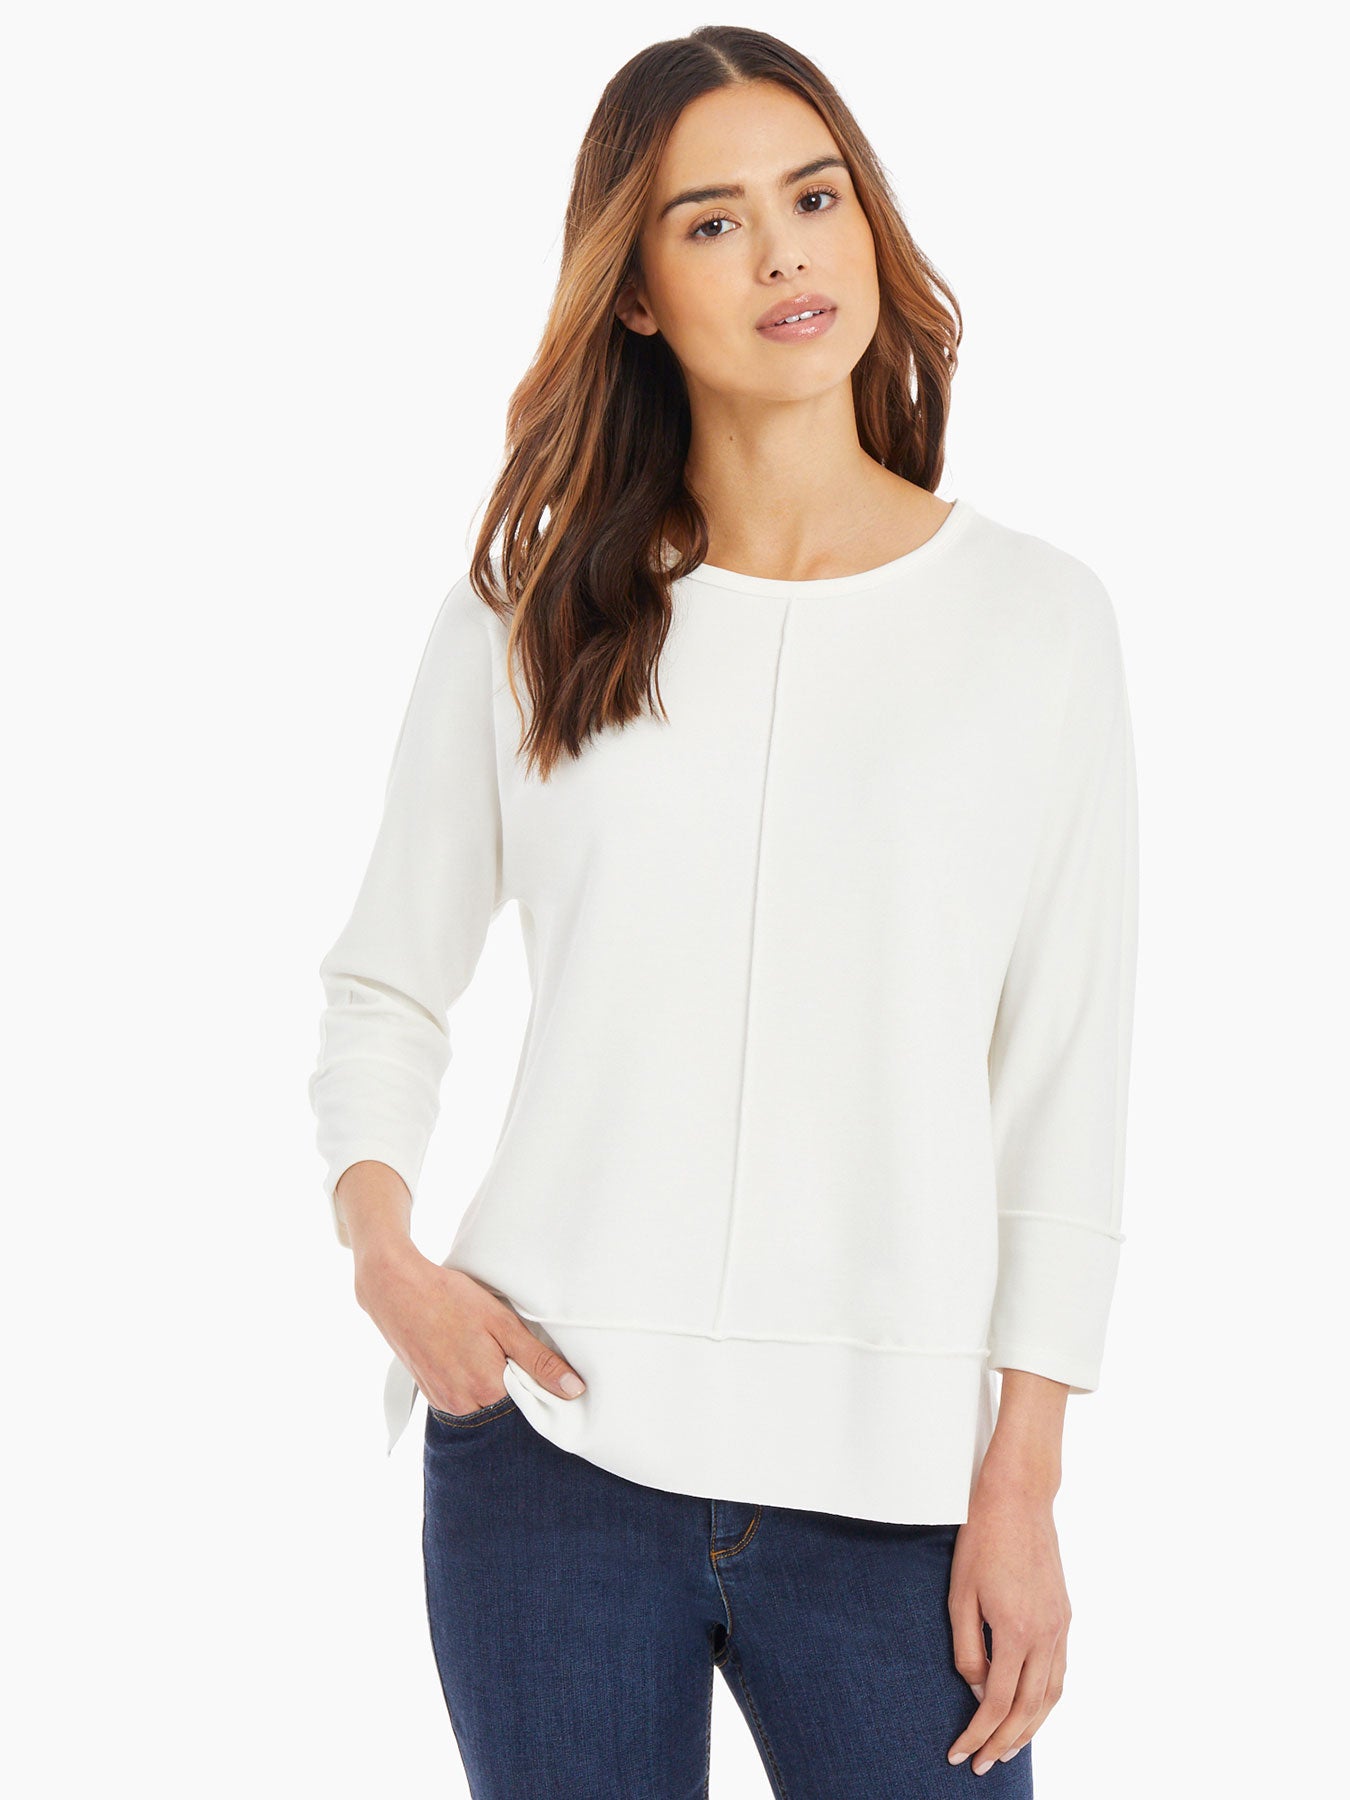 Relaxed Twill Utility-Pocket Tunic Shirt for Women, Old Navy